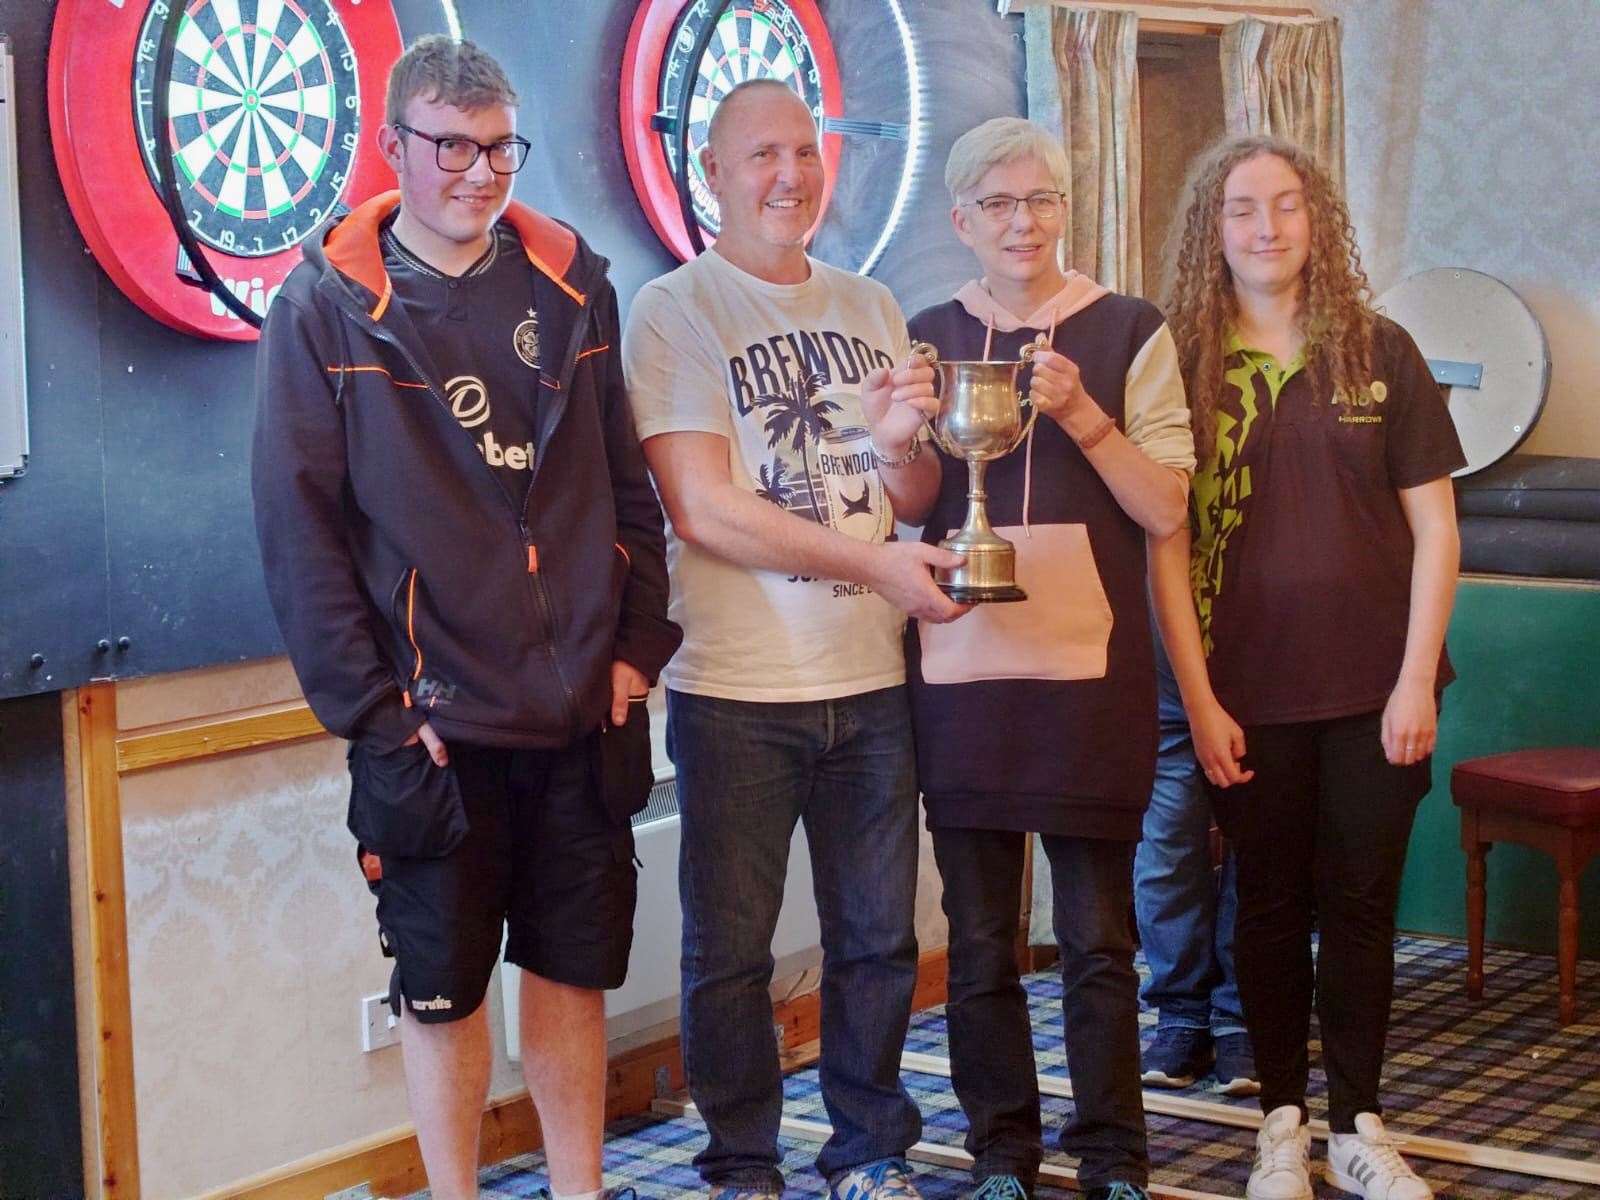 From left: Willie Keith Memorial Cup runner-up Ryan Campbell (Smiddy '2') and winner Willie Plank (Castletown Poachers), Karen Burke Memorial Trophy winner Freda Perry (Seaforth Ladies 'B') and the runner-up, Ryan's sister Sammy Campbell (Seaforth).